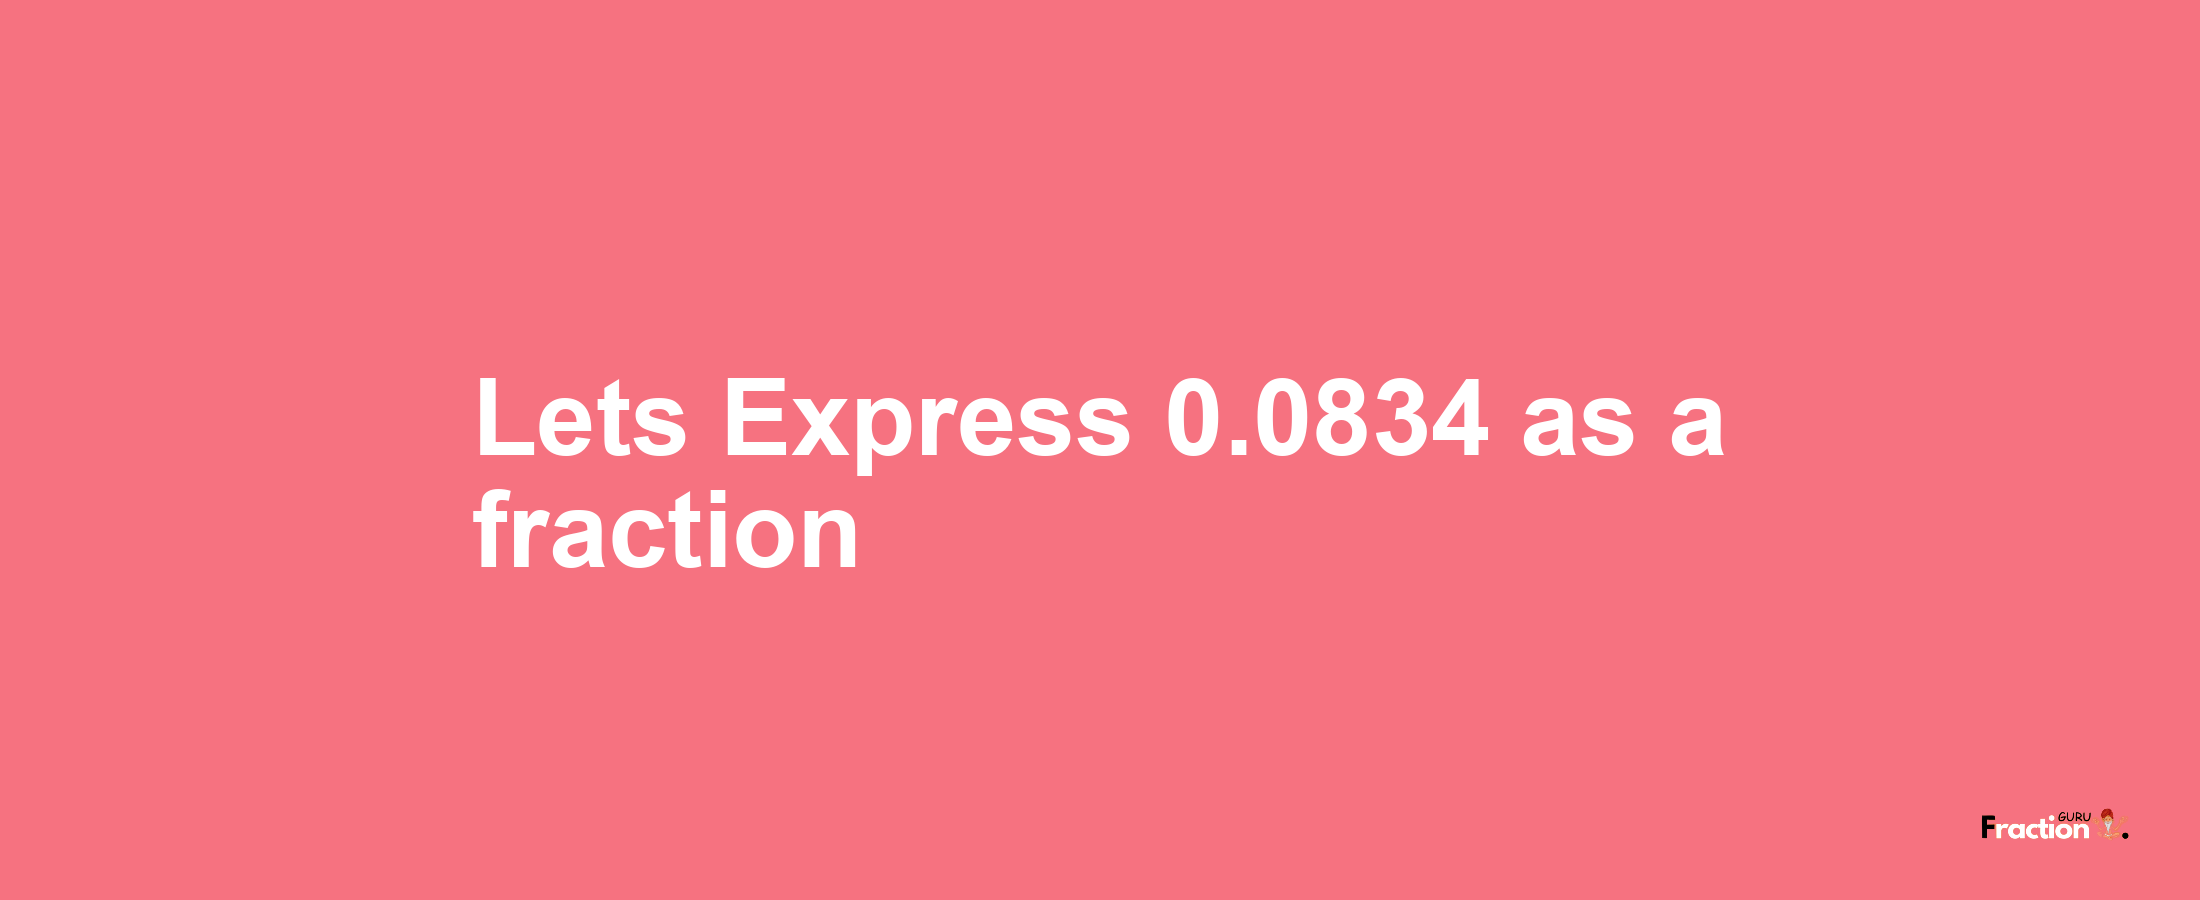 Lets Express 0.0834 as afraction